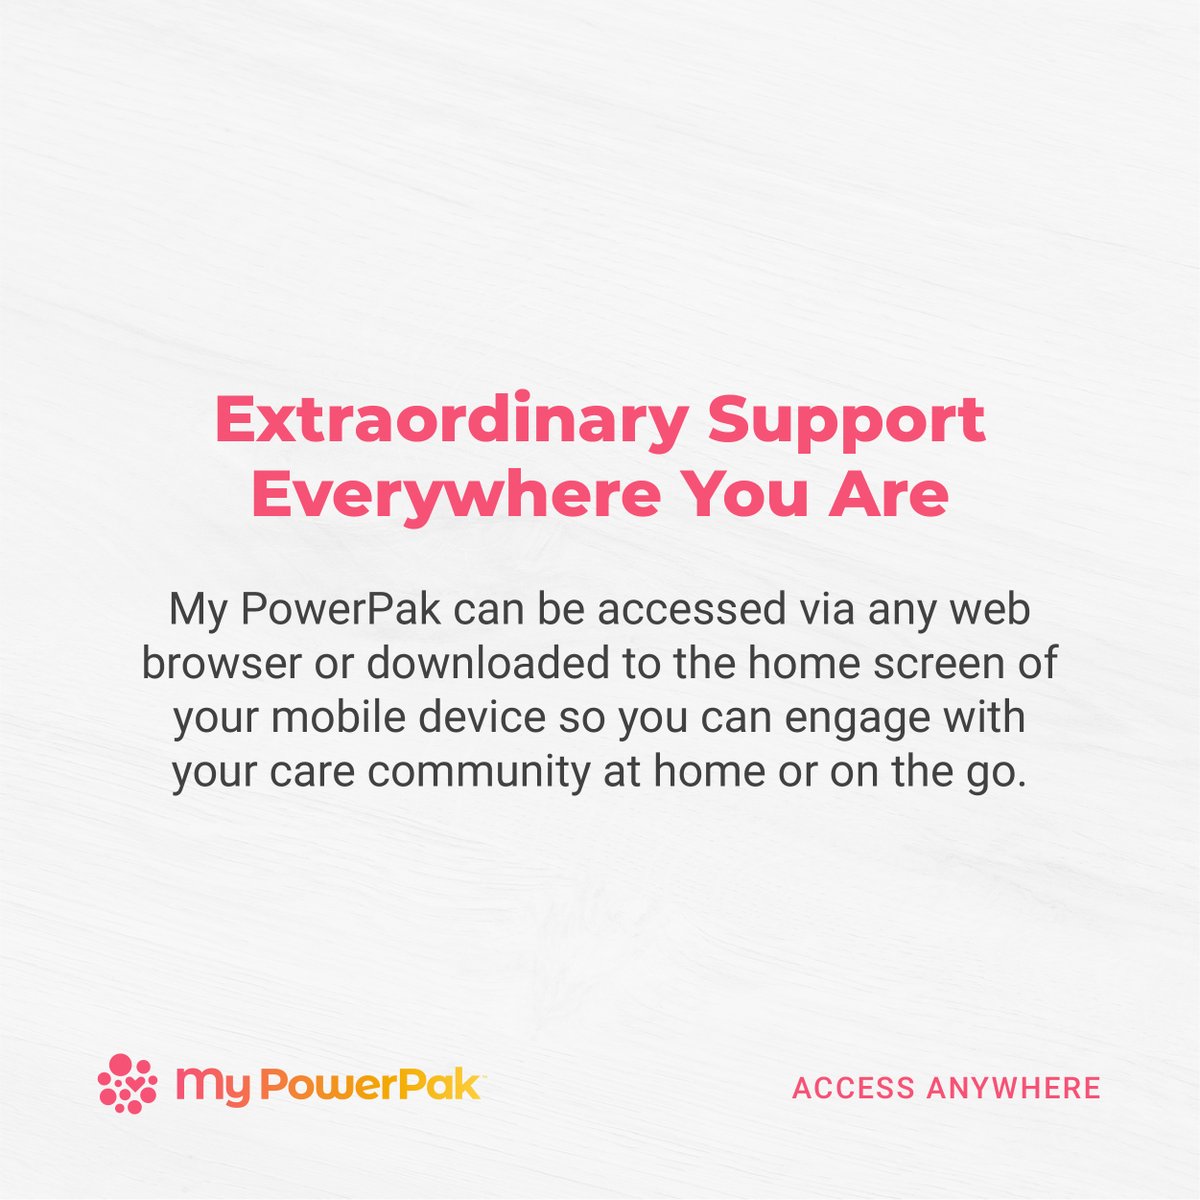 My PowerPak is a Progressive Web App (PWA), meaning you can give and receive extraordinary support from any desktop browser or apps on mobile devices. Visit mypowerpak.com/download for apps, or click 'Sign In' for web access.
#Caregiving #AccessAnywhere #AndroidandiOS #AppStore